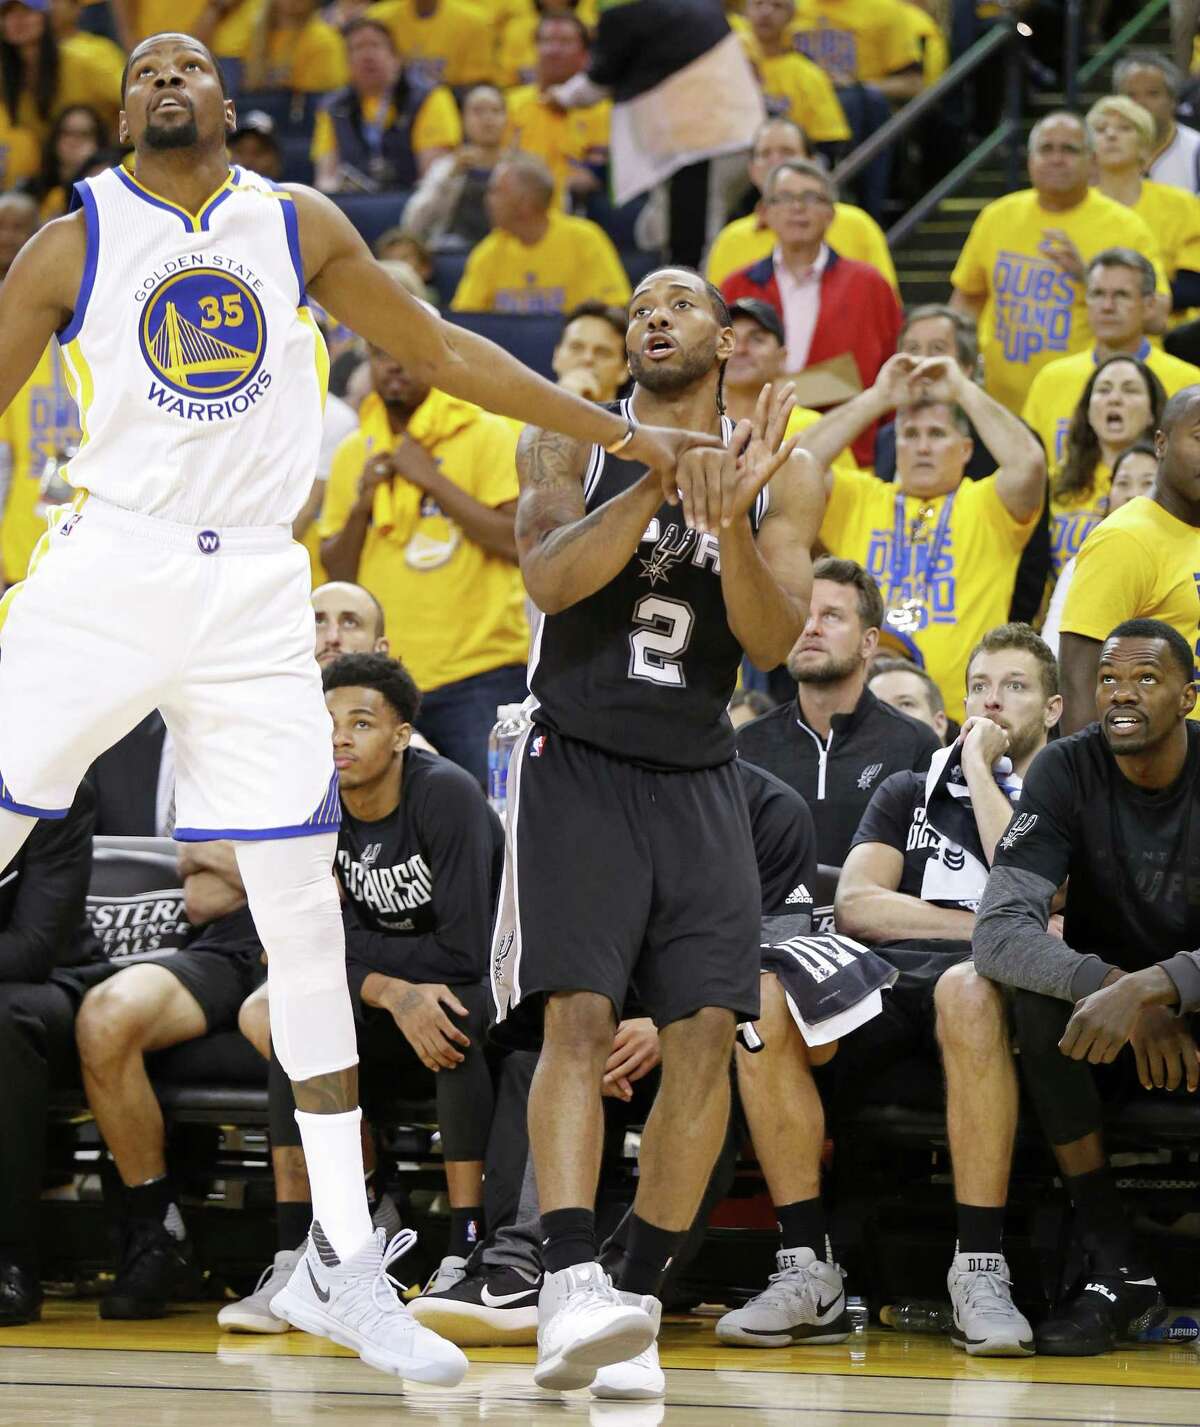 Golden State’s Kevin Durant and the Spurs’ Kawhi Leonard watch Leonard’s shot during second half action of Game 1 in the Western Conference finals against the Warriors on May 14, 2017 at Oracle Arena in Oakland, Calif. Leonard tweaked his left ankle on a teammate’s foot after the play.